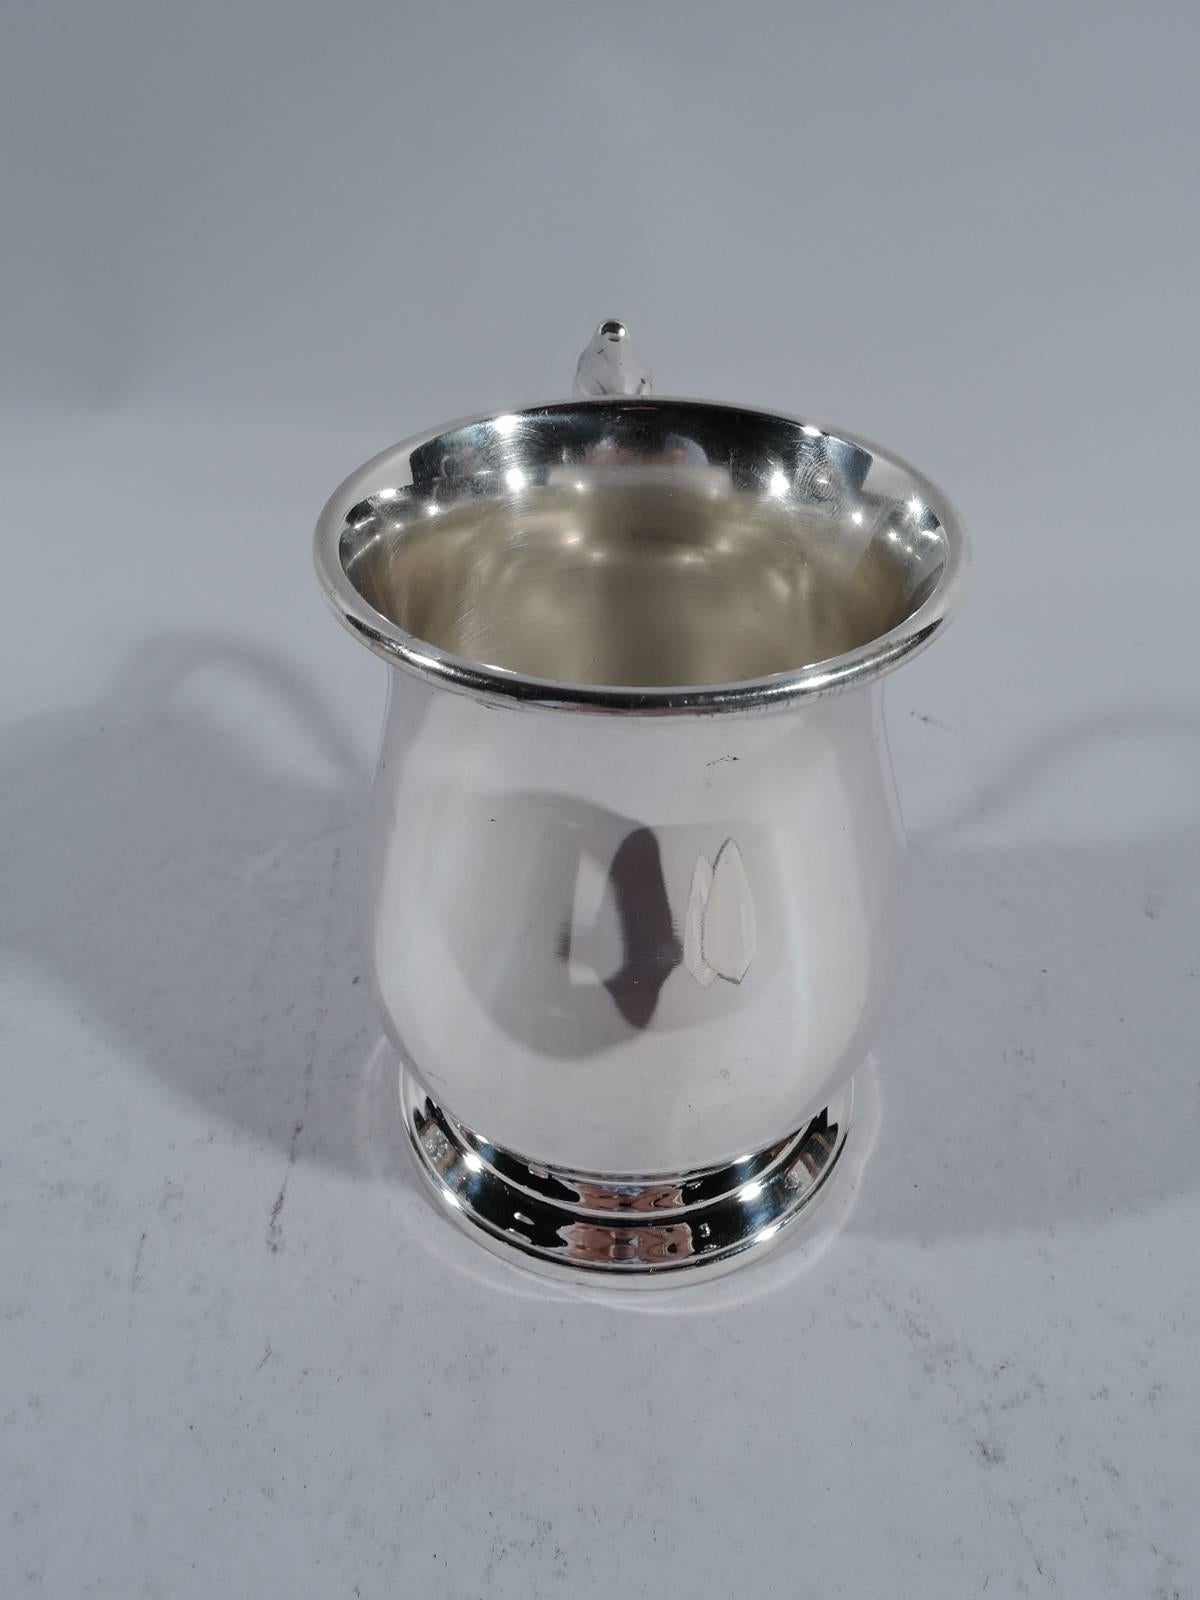 Sterling silver baby cup. Made by Manchester in Providence. Baluster body with capped s-scroll handle and spread foot. Lots of room for engraving. Marks include no. 22 and phrase Authentic reproduction / of Paul de Lamerie mug / 17th century